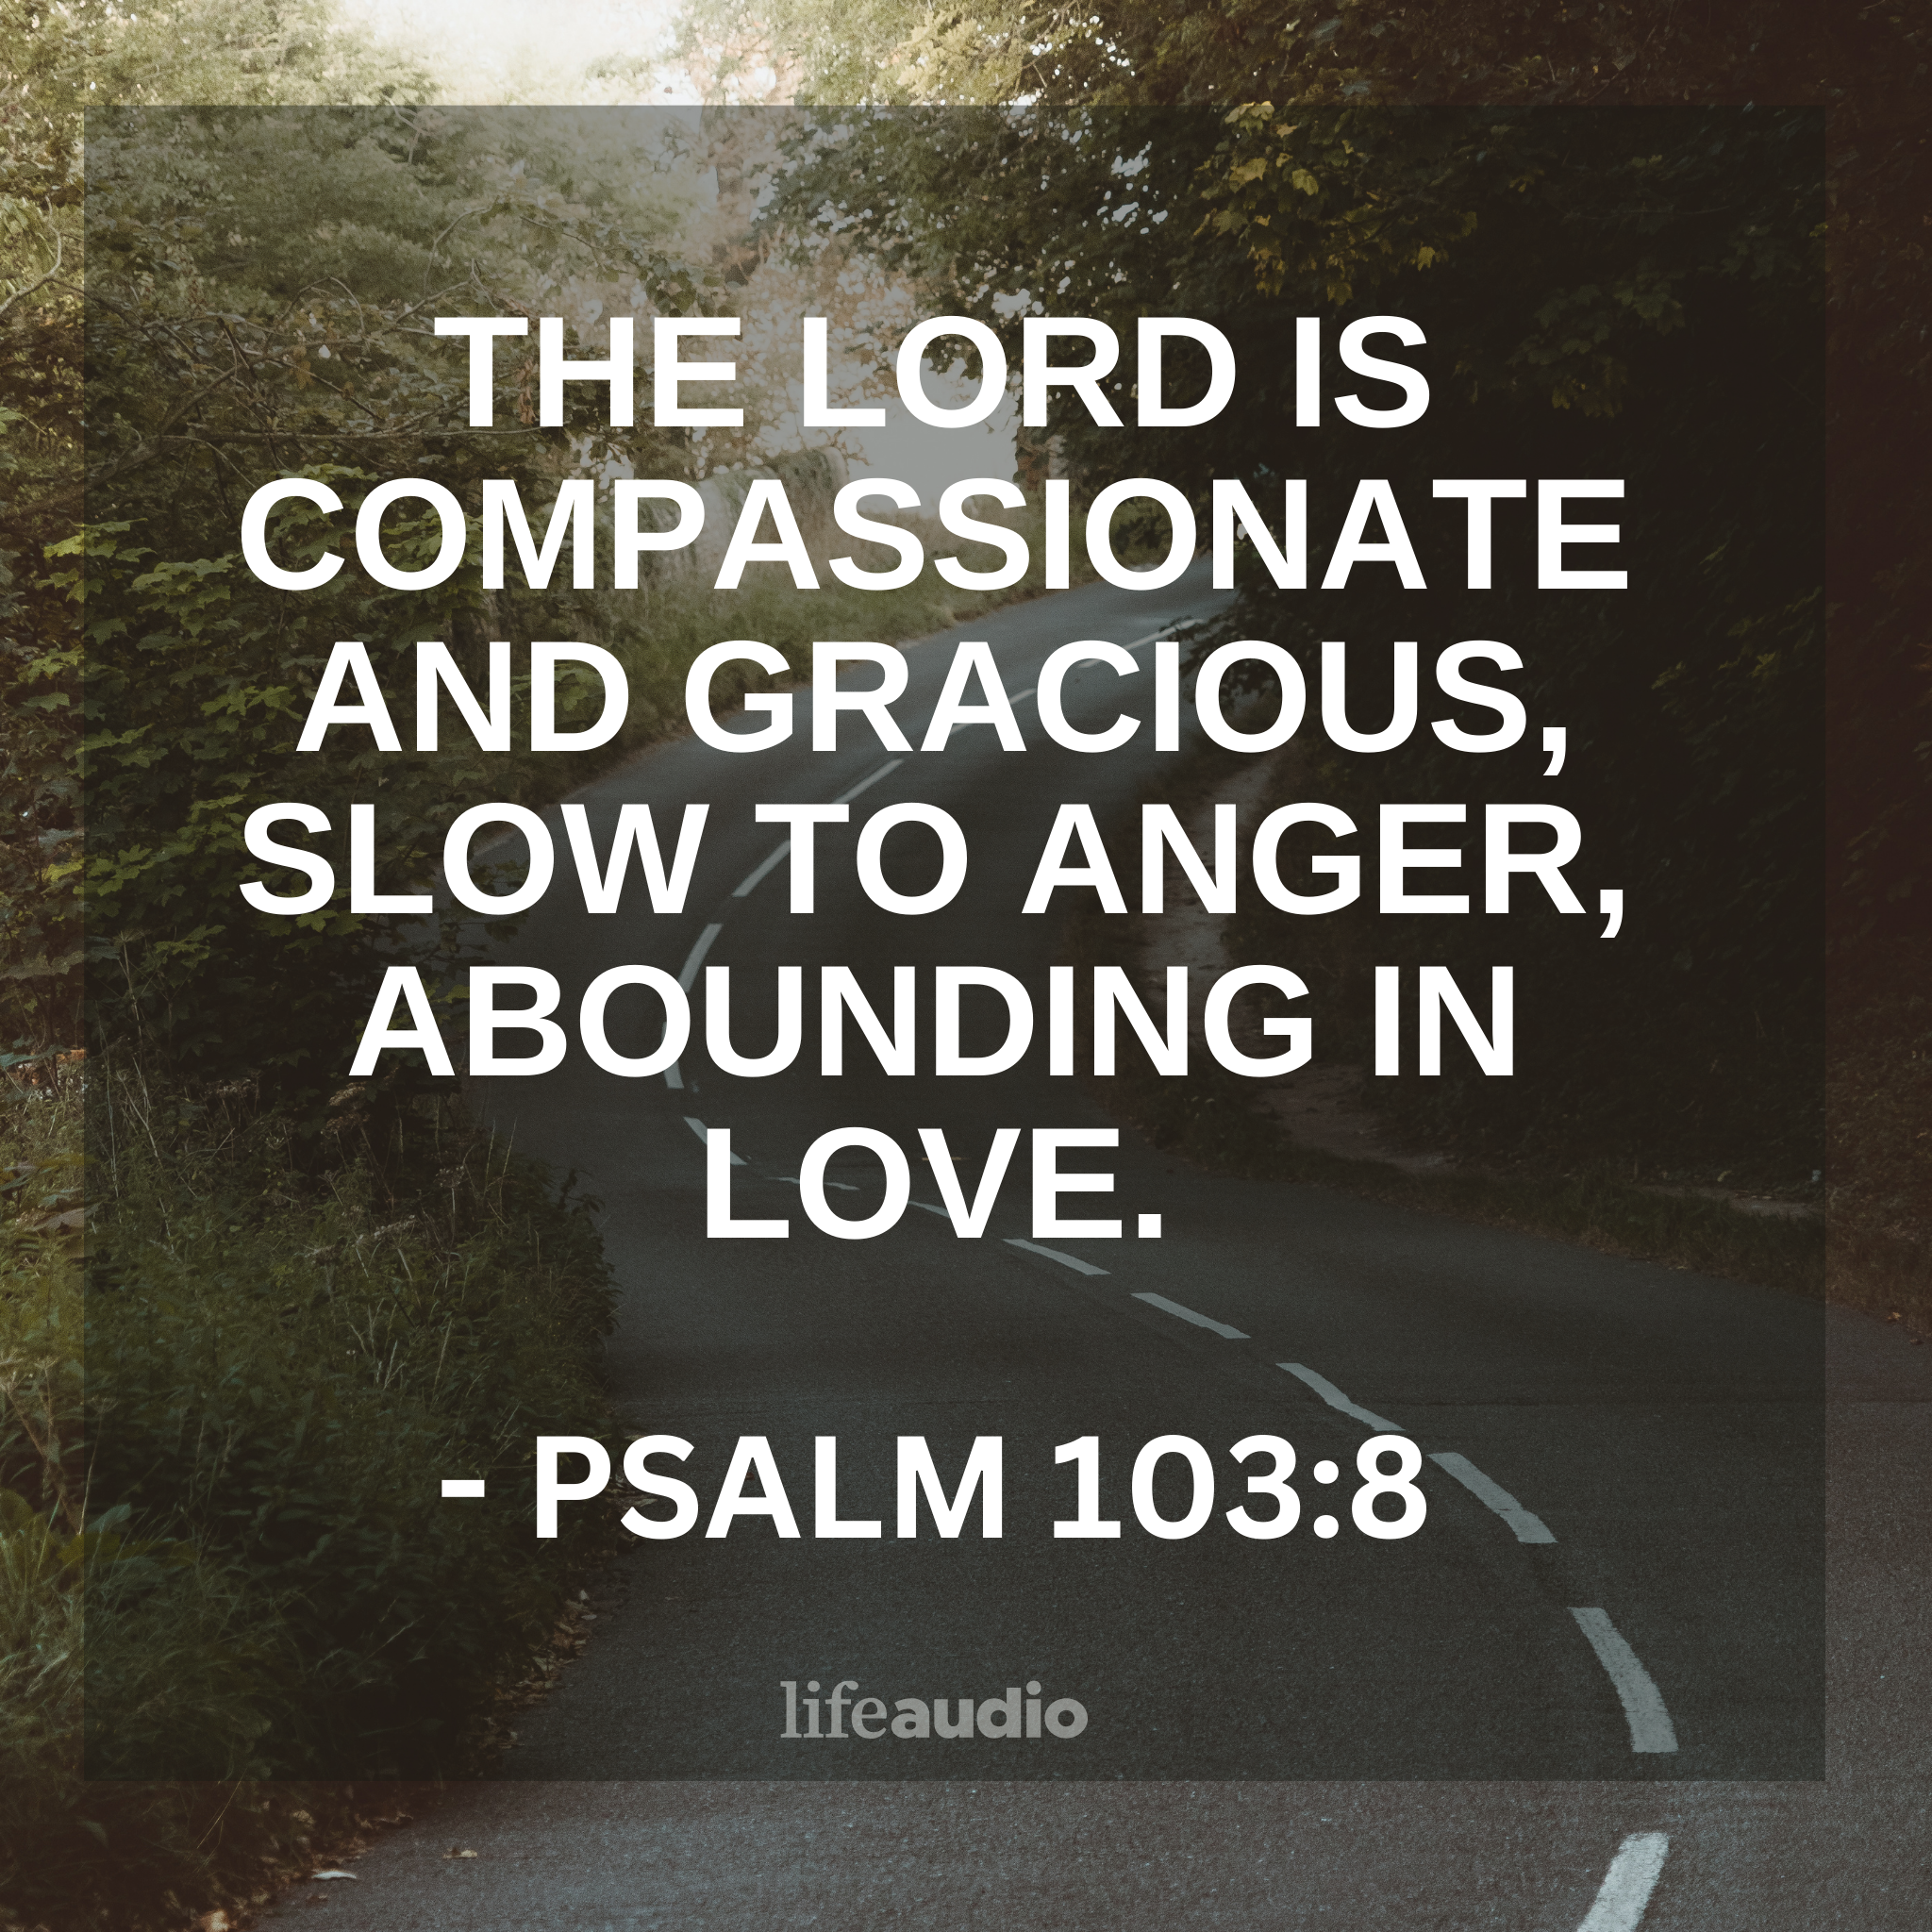 Experiencing God's Compassionate Love (Psalm 103:8)